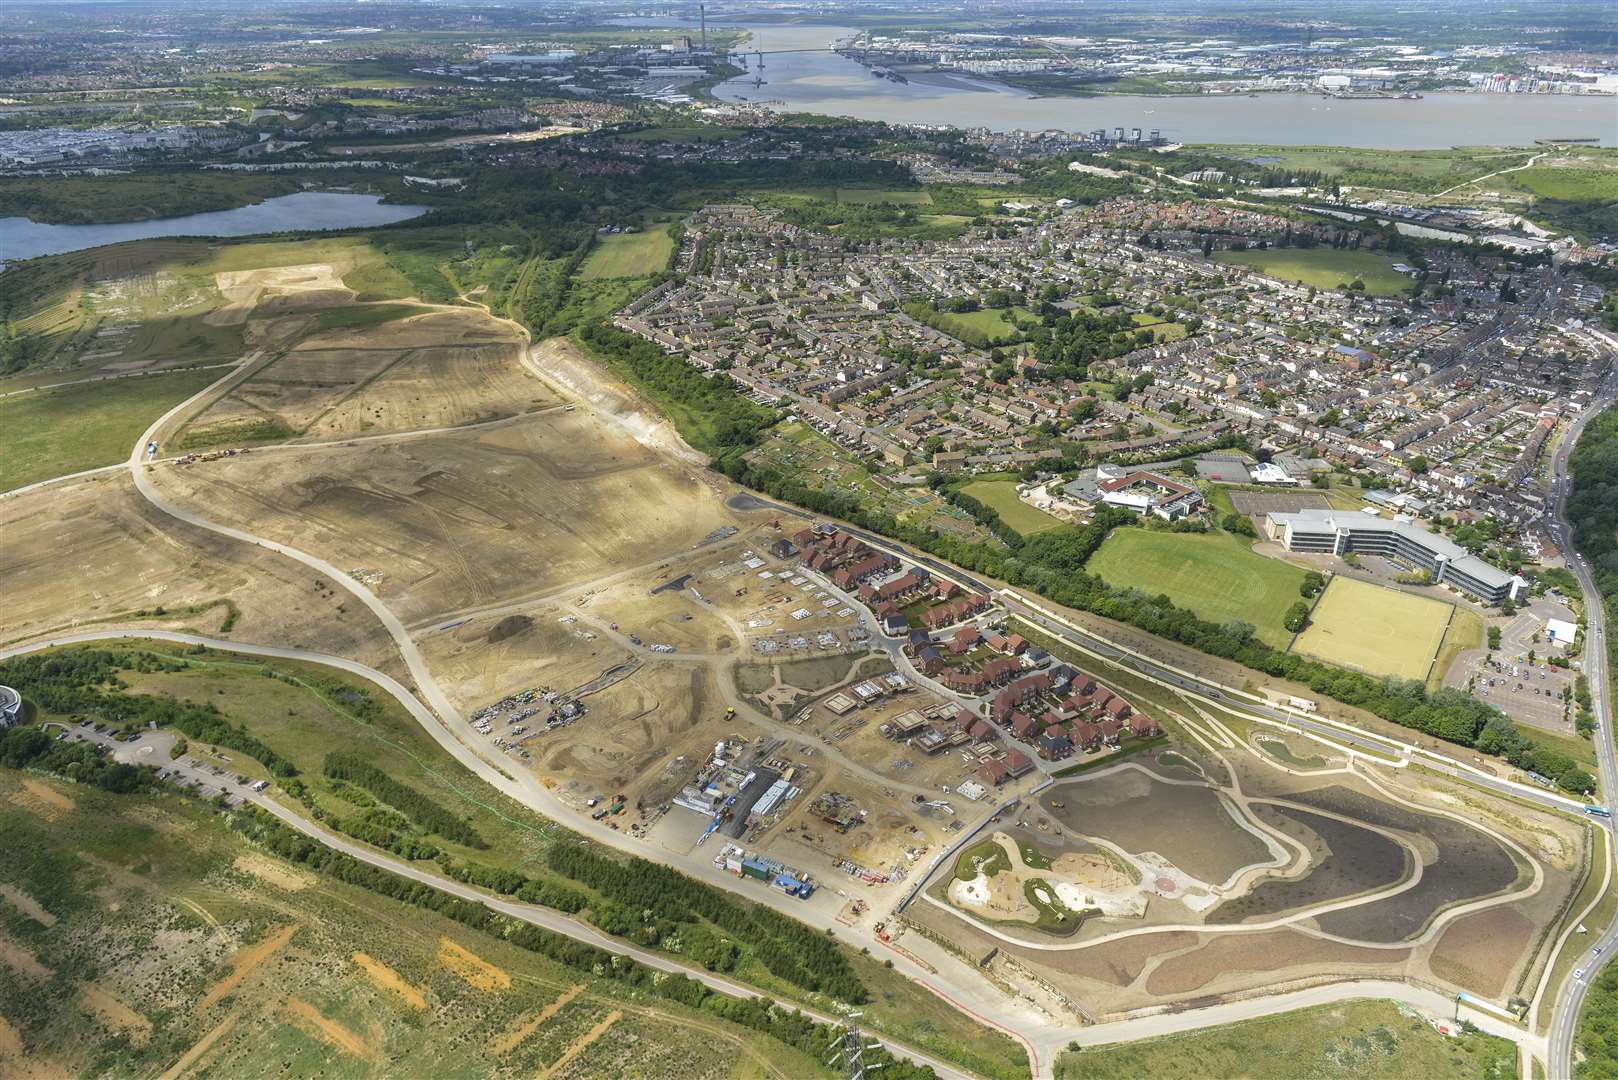 The Eastern Quarry at Ebbsfleet Garden City where there are plans for more than 6,000 homes